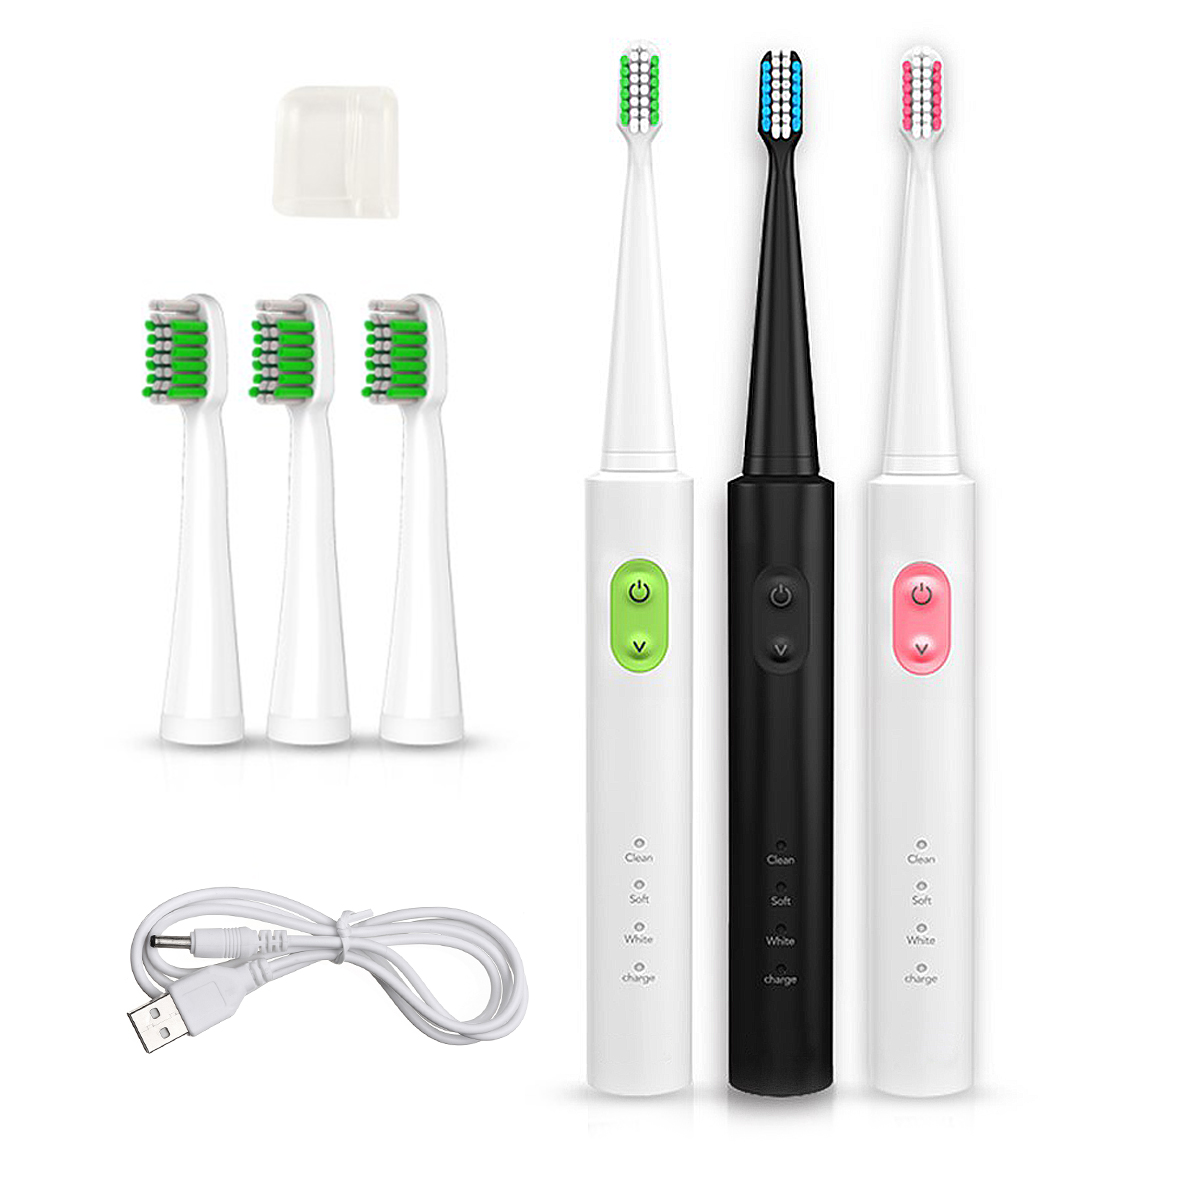 Travel-Rechargeable-Ultrasonic-Electric-Toothbrush-Waterproof-3-Cleaning-Mode-Teeth-Clean-4-Heads-1275782-6